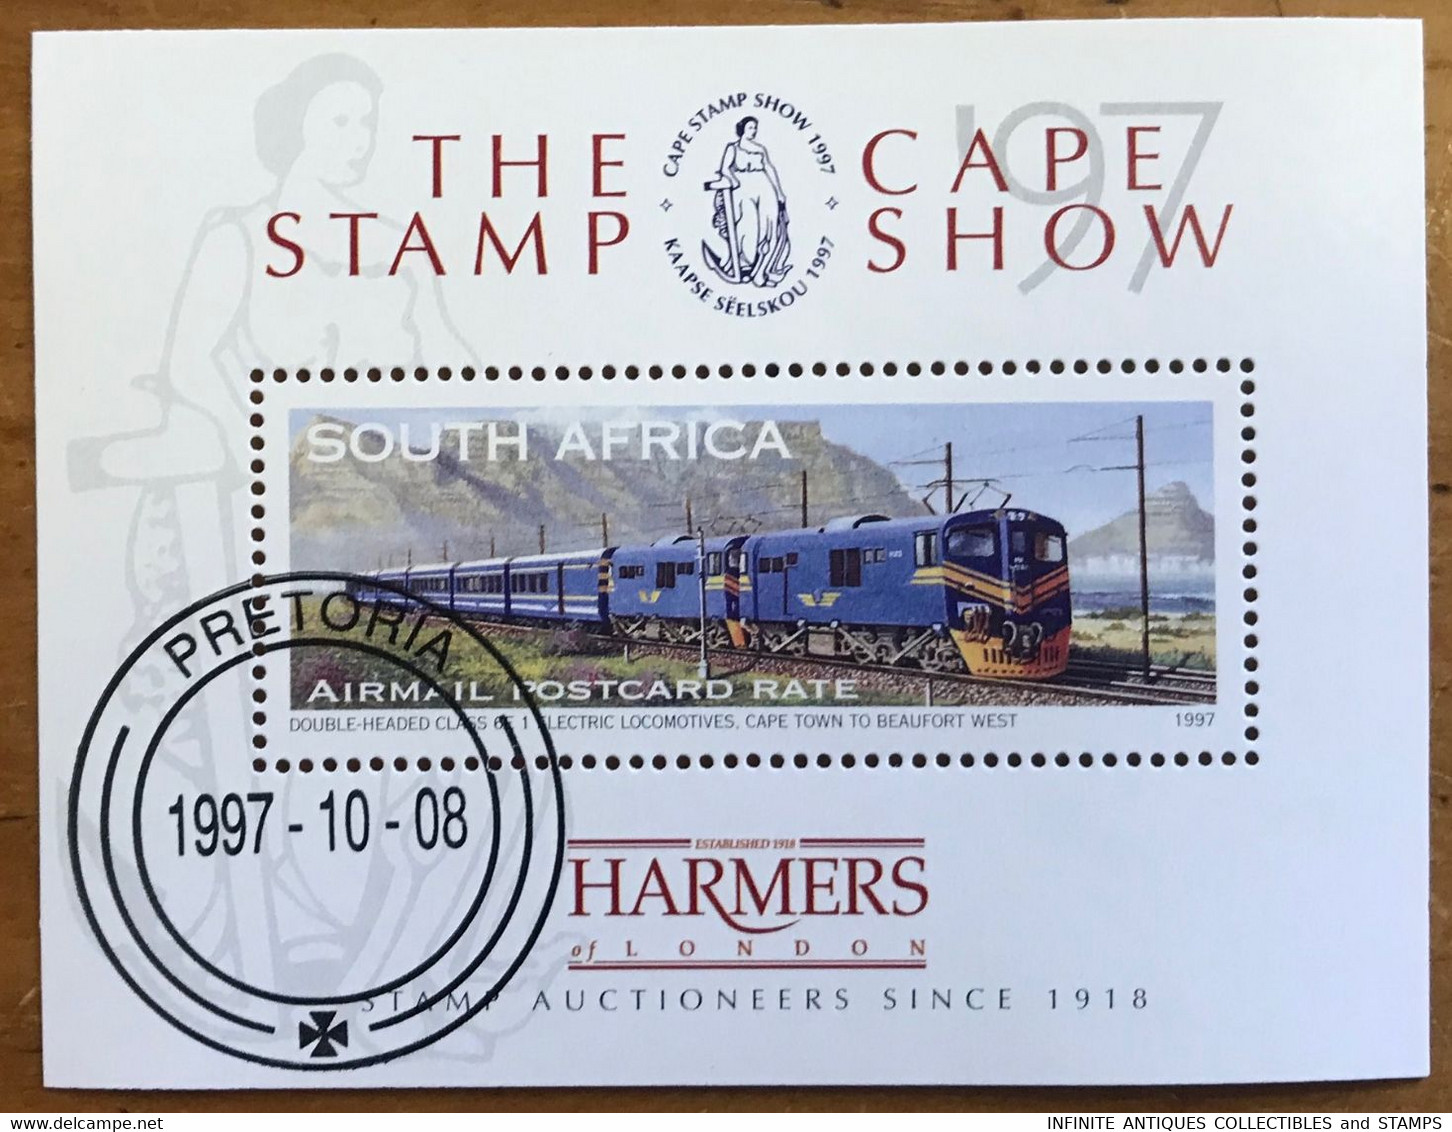 SOUTH AFRICA BLUE TRAIN SELECTION of ITEMS FDC's x 10 CTO SHEET of STAMPS CYLINDER of 5 Miniature Sheet CAPE STAMP SHOW